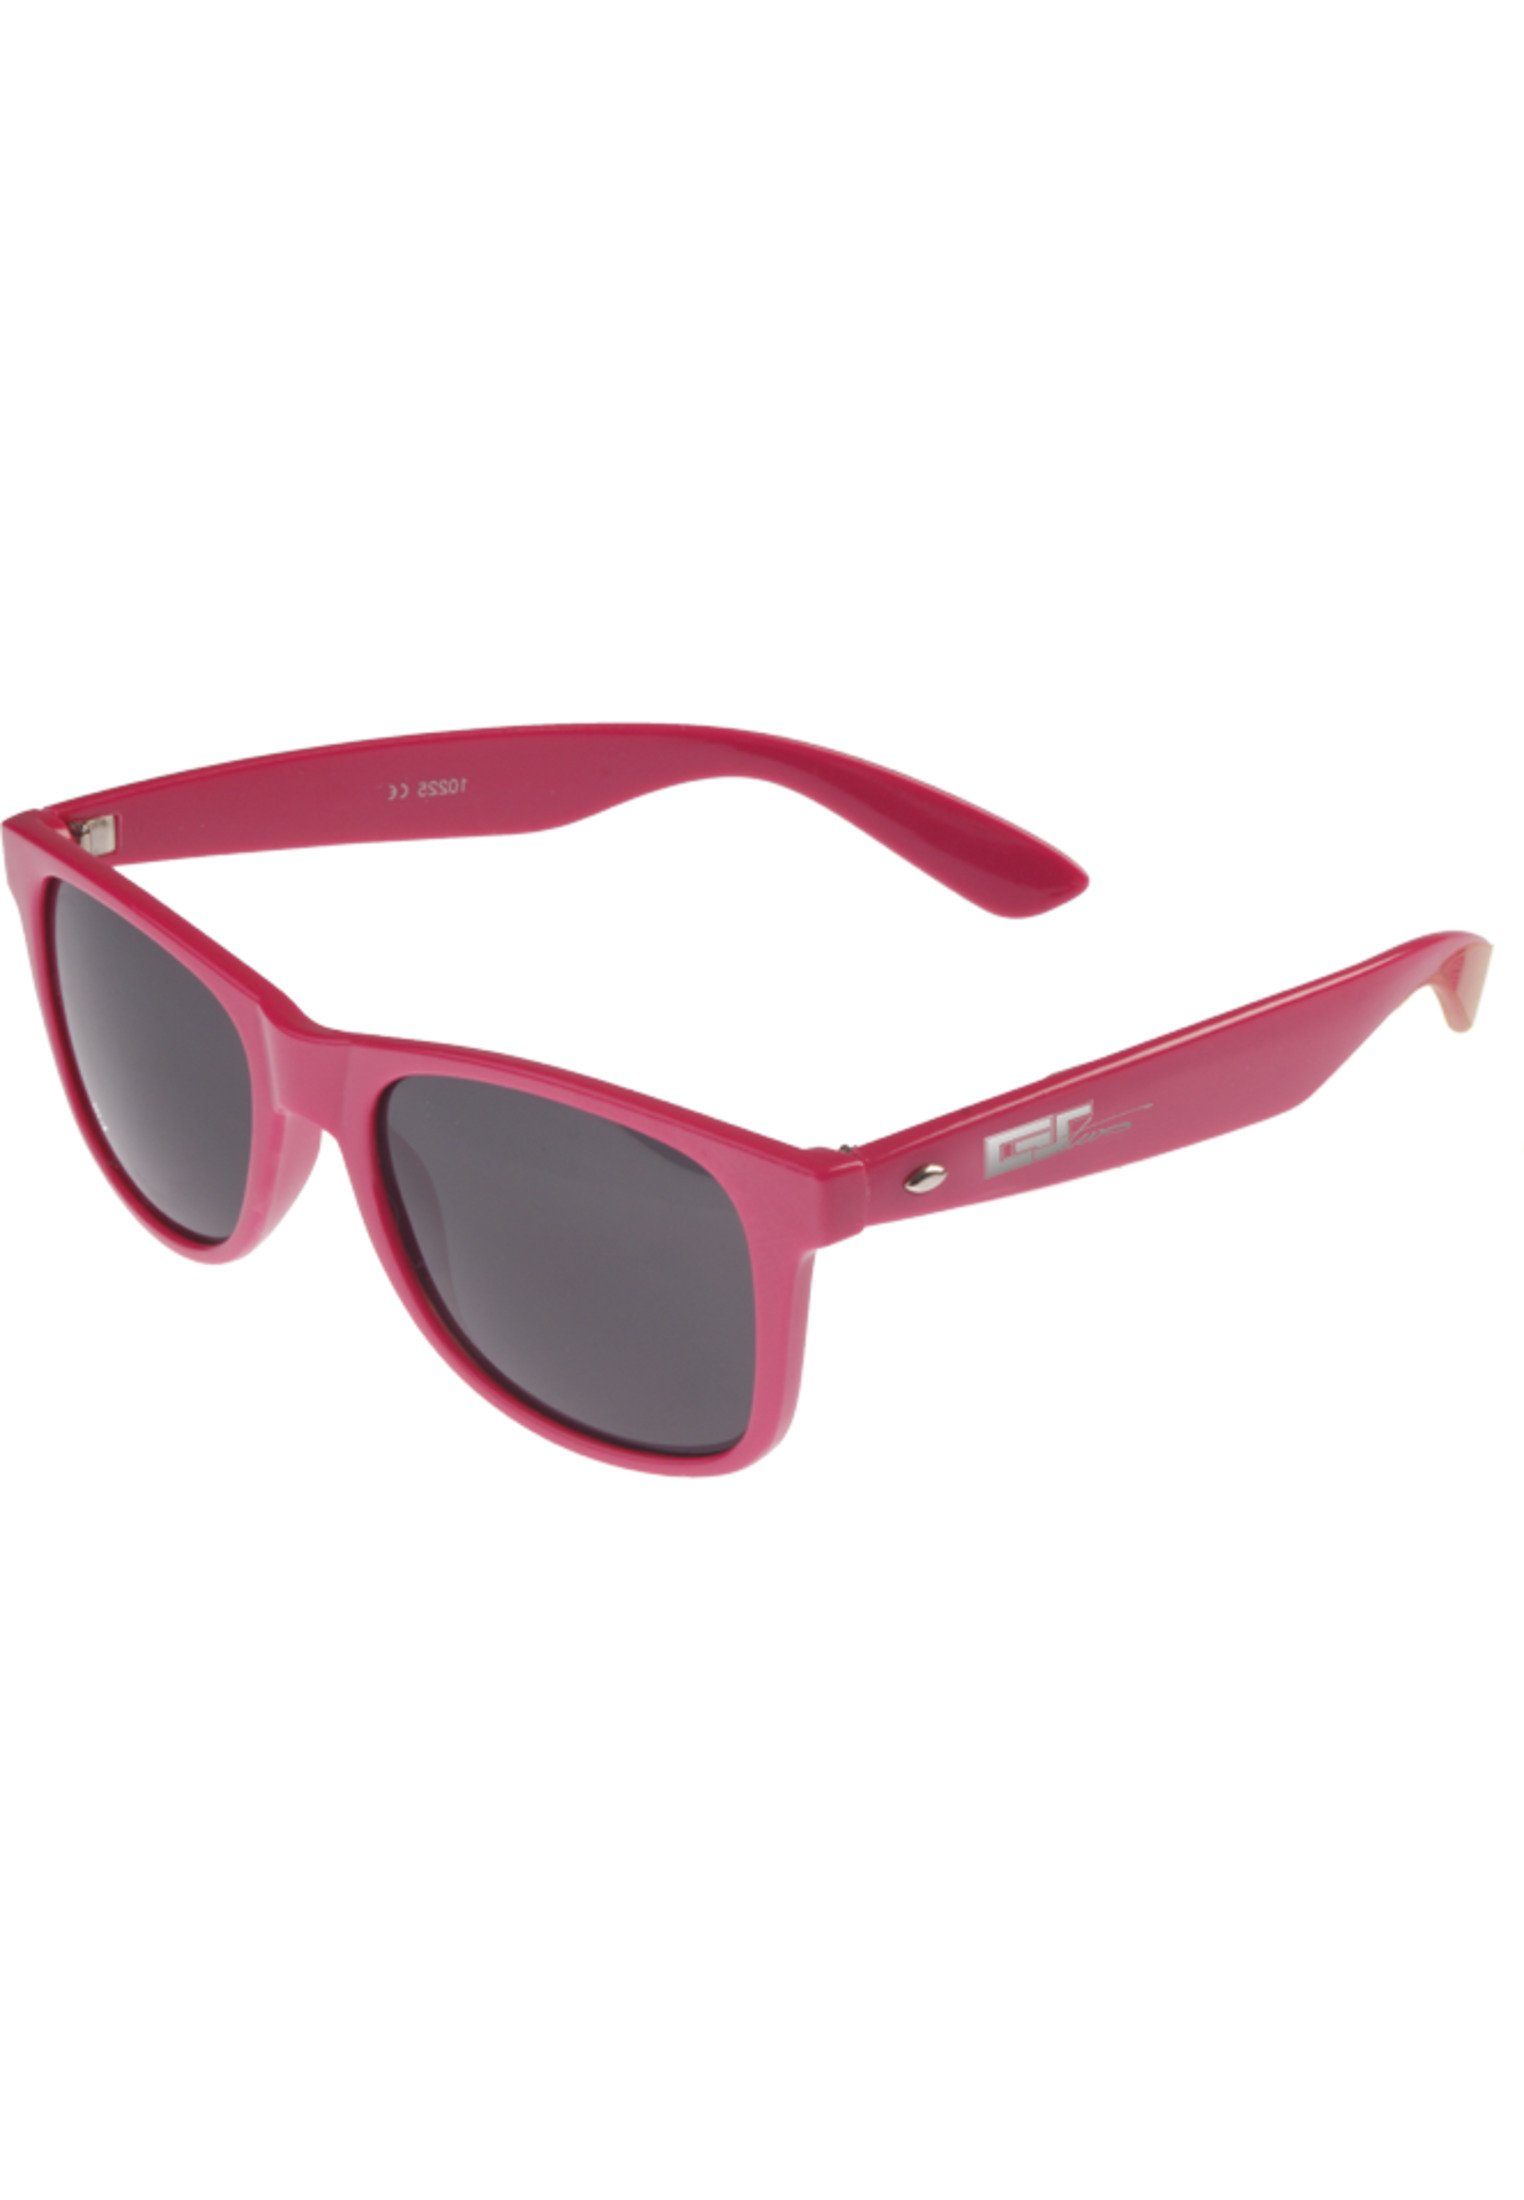 GStwo Groove Accessoires MSTRDS Sonnenbrille Shades magenta